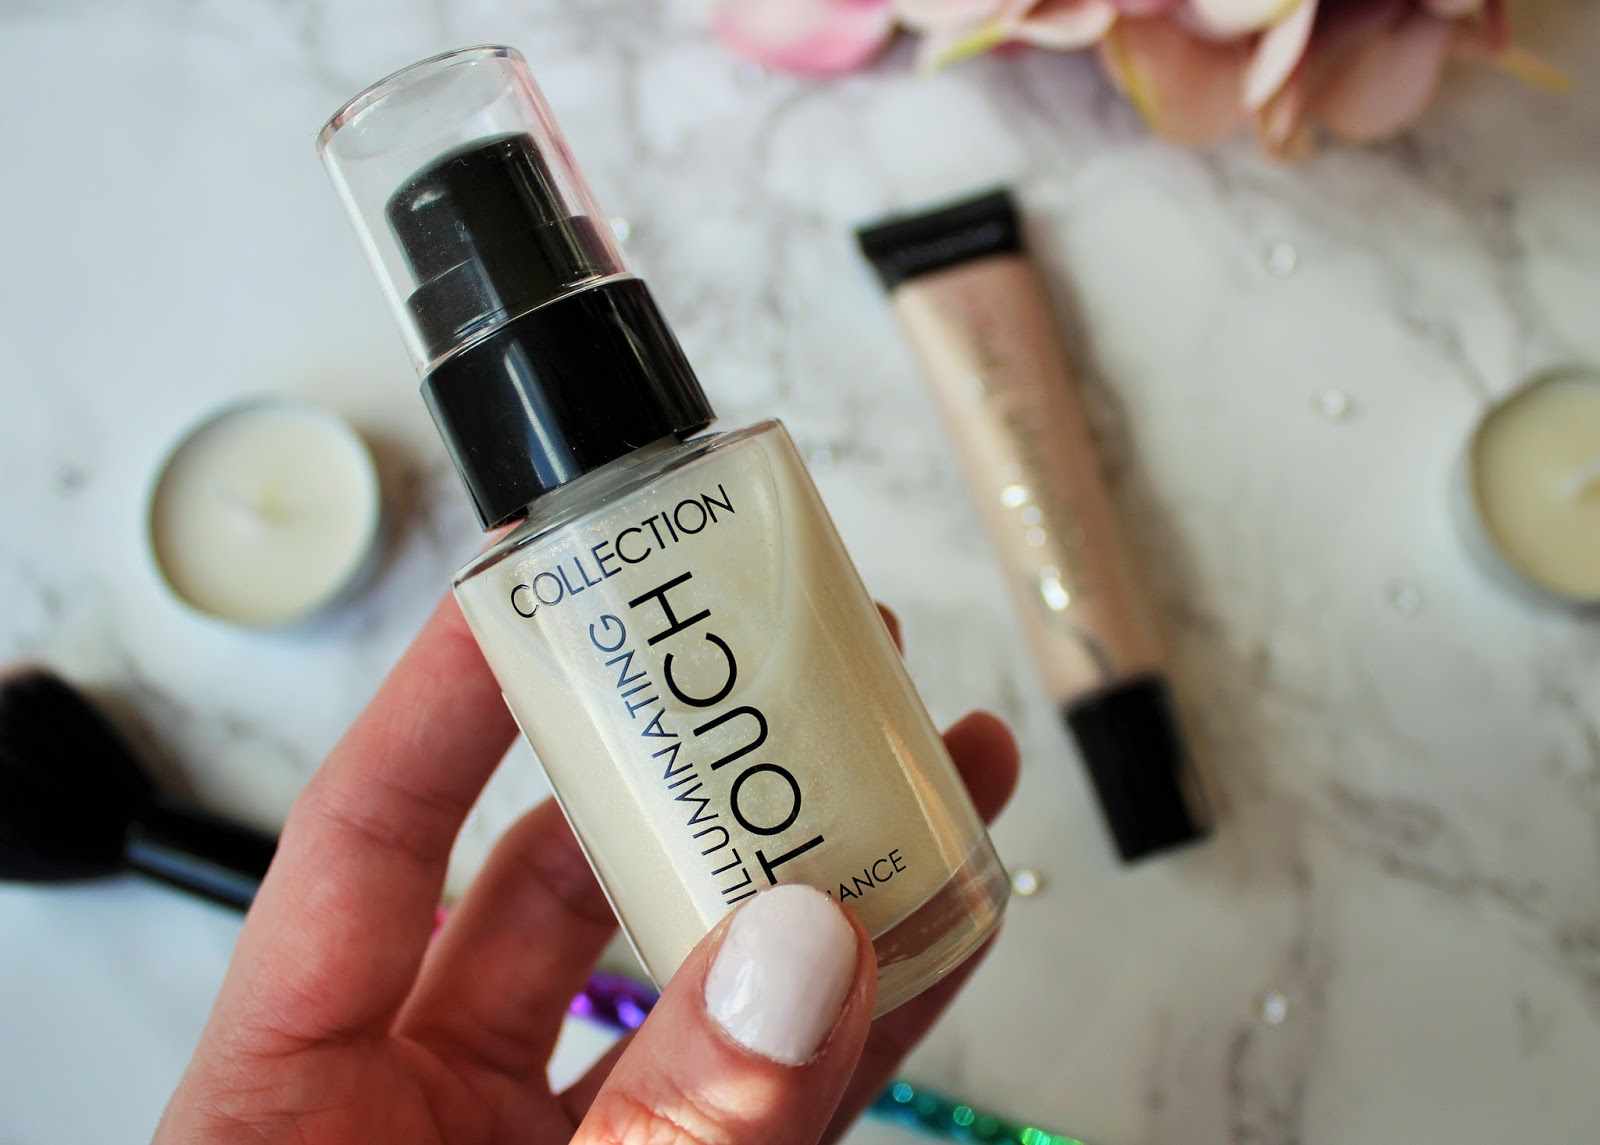 Two Affordable Makeup Products For Glowing Skin - 3 - Collection Illuminating Touch Liquid Radiance Highlighter